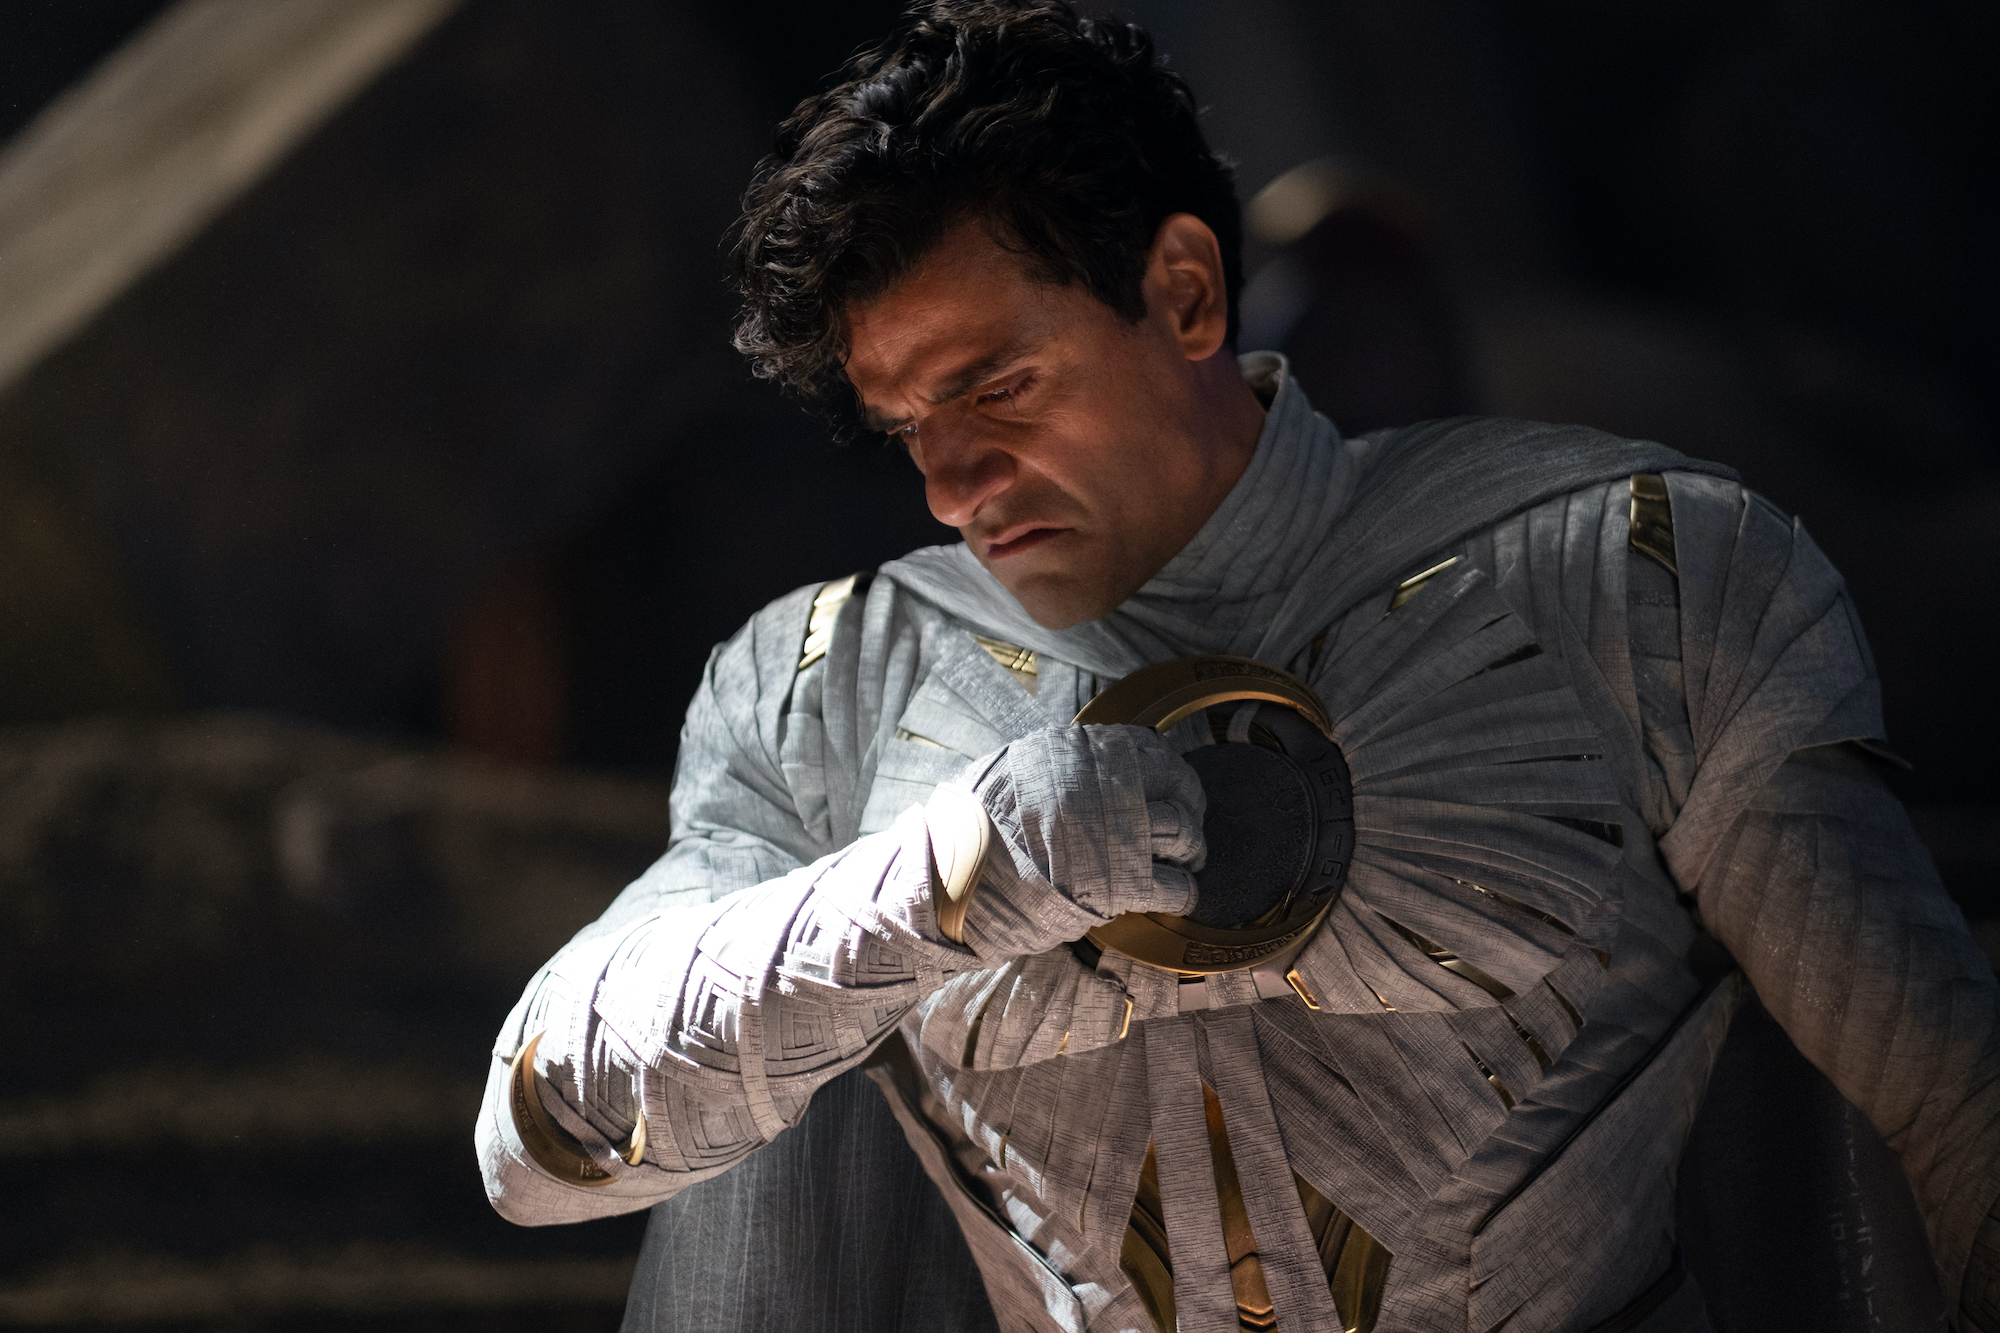 Oscar Isaac as Marc Spector in 'Moon Knight' Episode 6. He's wearing his Moon Knight costume and holding the sickle he throws.